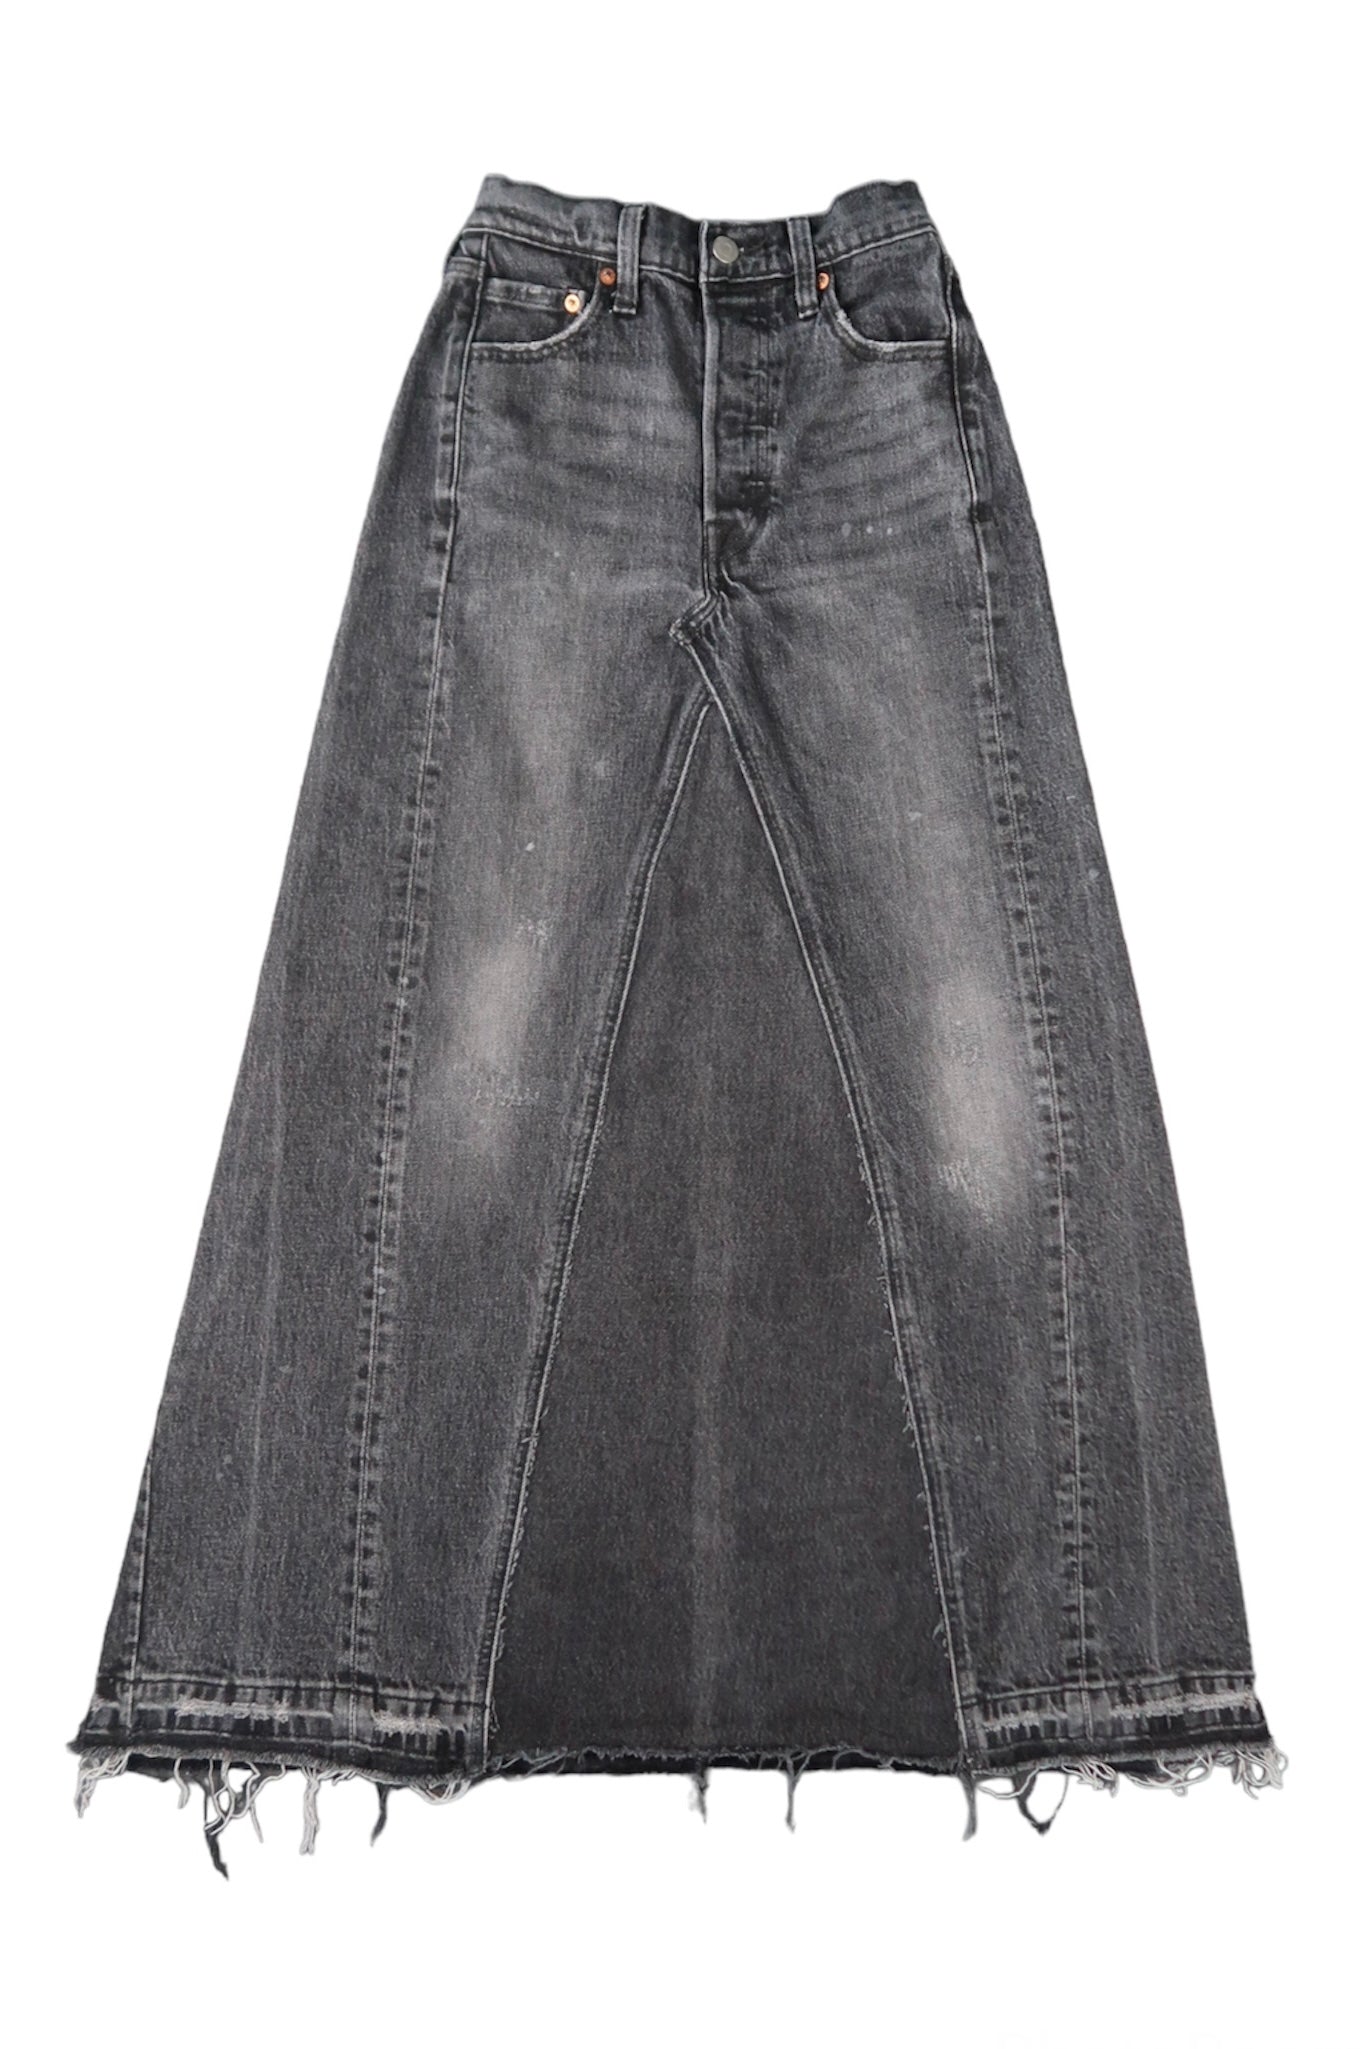 Reworked Levi’s Skirts